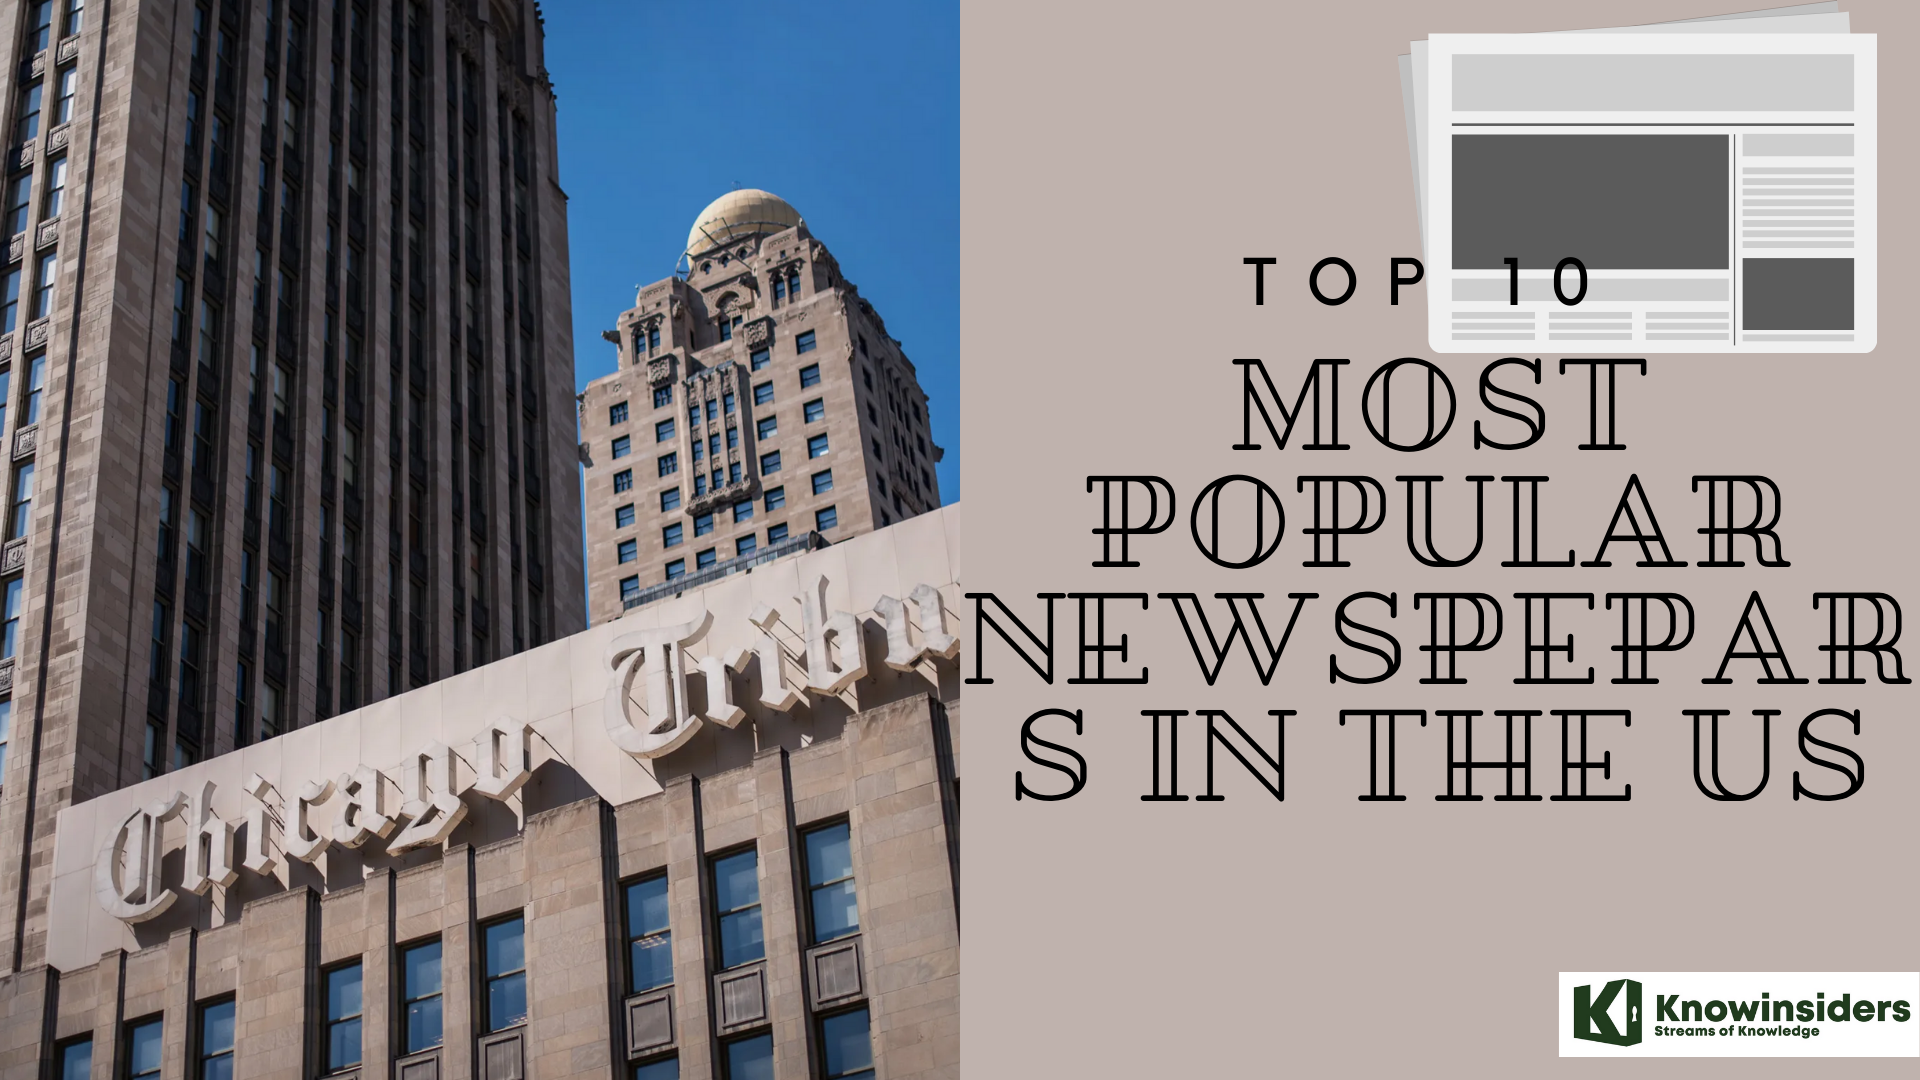 Top 10 most popular newspapers in the US 